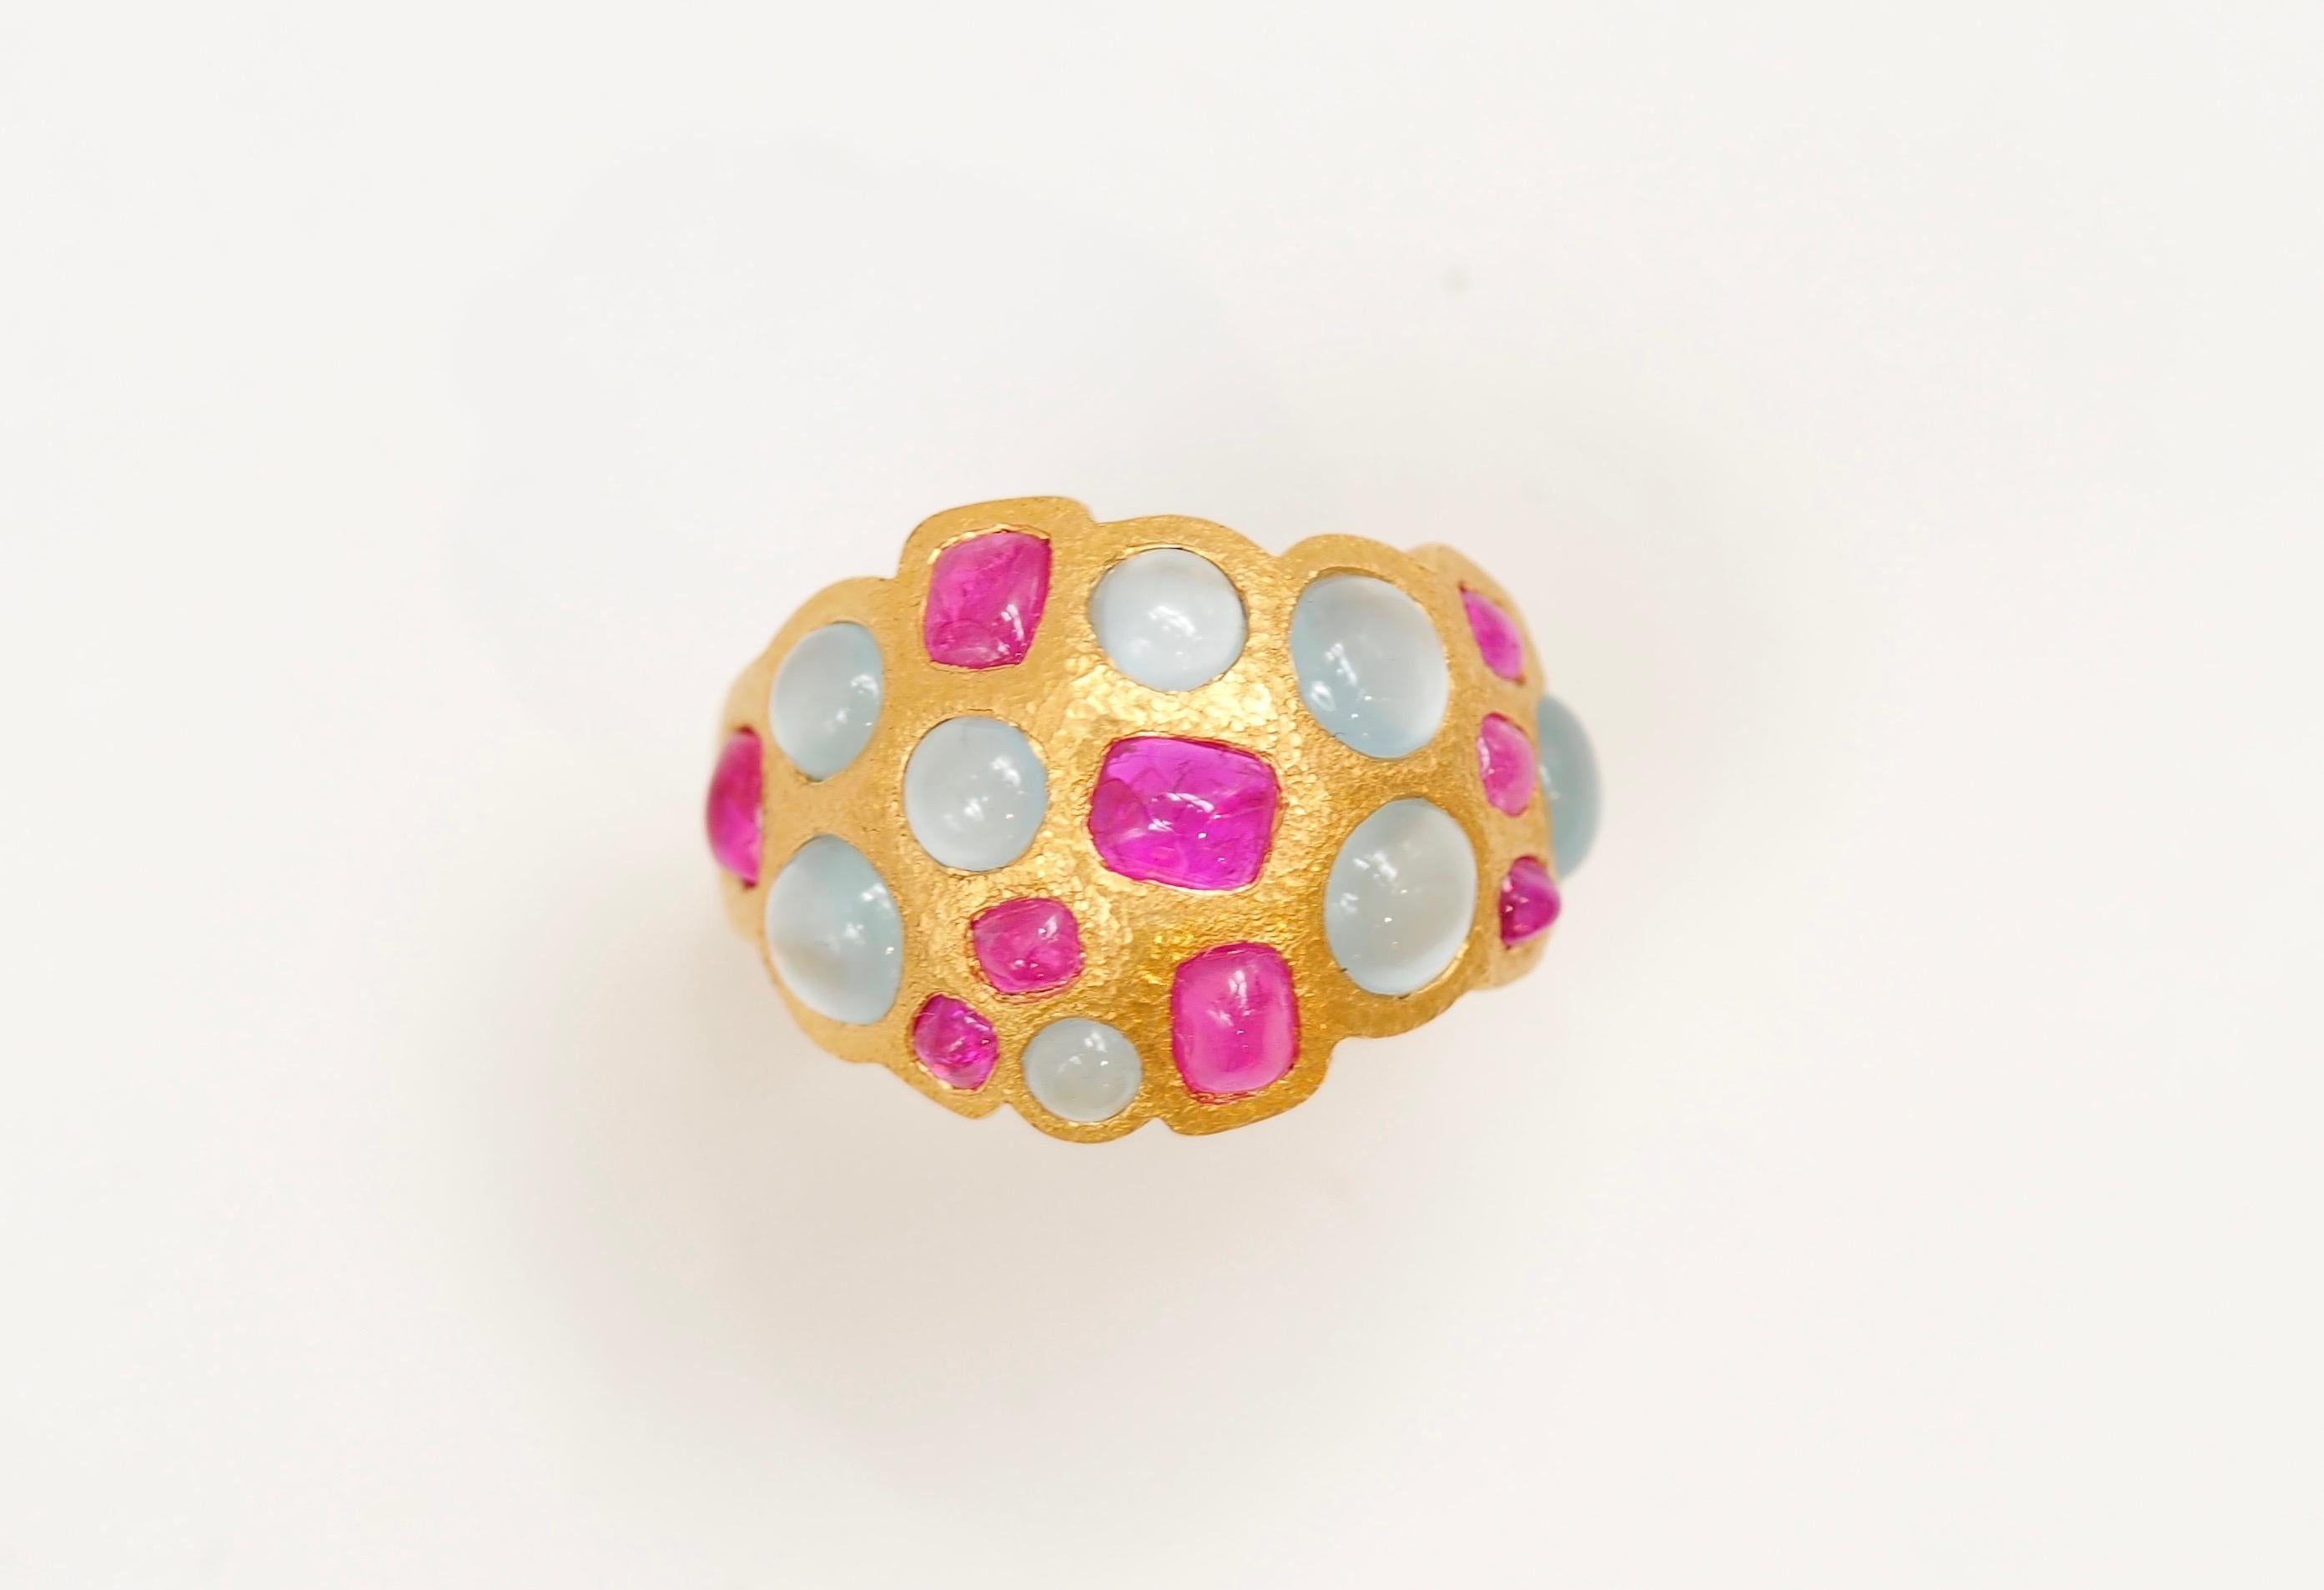 This colourful and irregular band ring is hand-hammered and set with 9 natural rubies sugarloafs for a total weight of 2.97cts & 8 cabochons of aquamarine (total weight: 2cts).
The stones can exhibit visible natural and typical inclusions. 

The